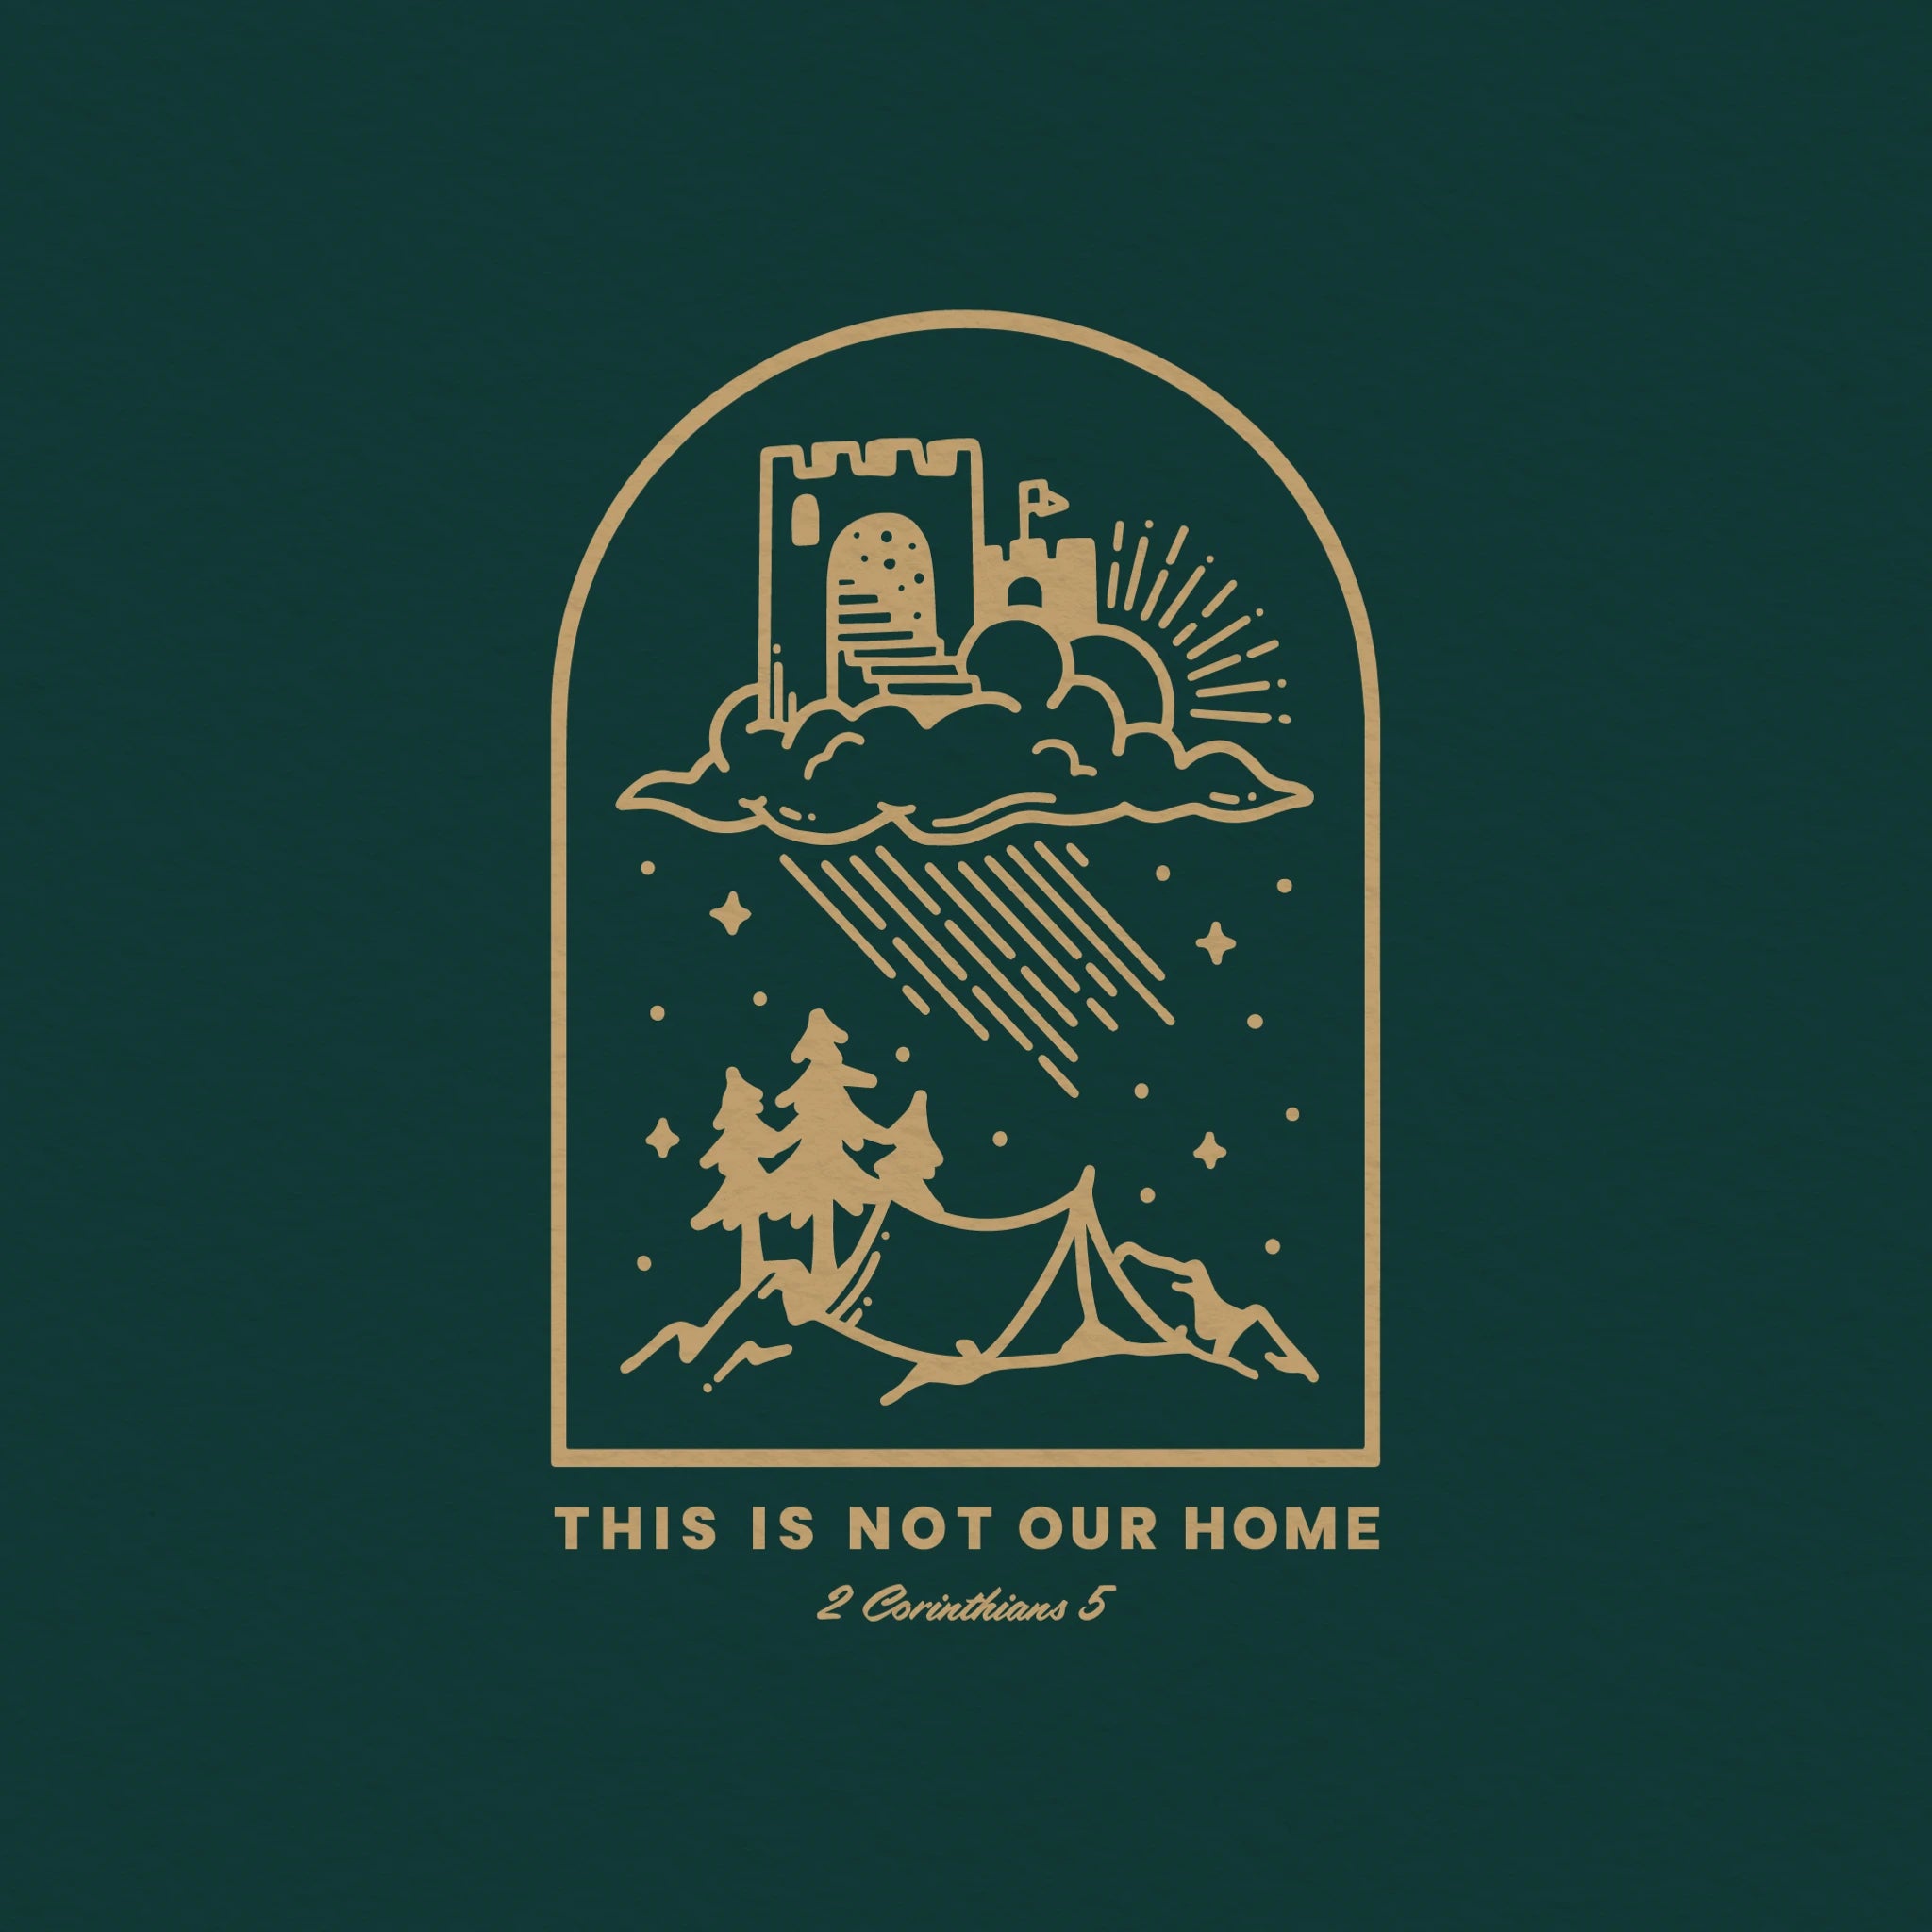 NOT OUR HOME - Proclamation Coalition